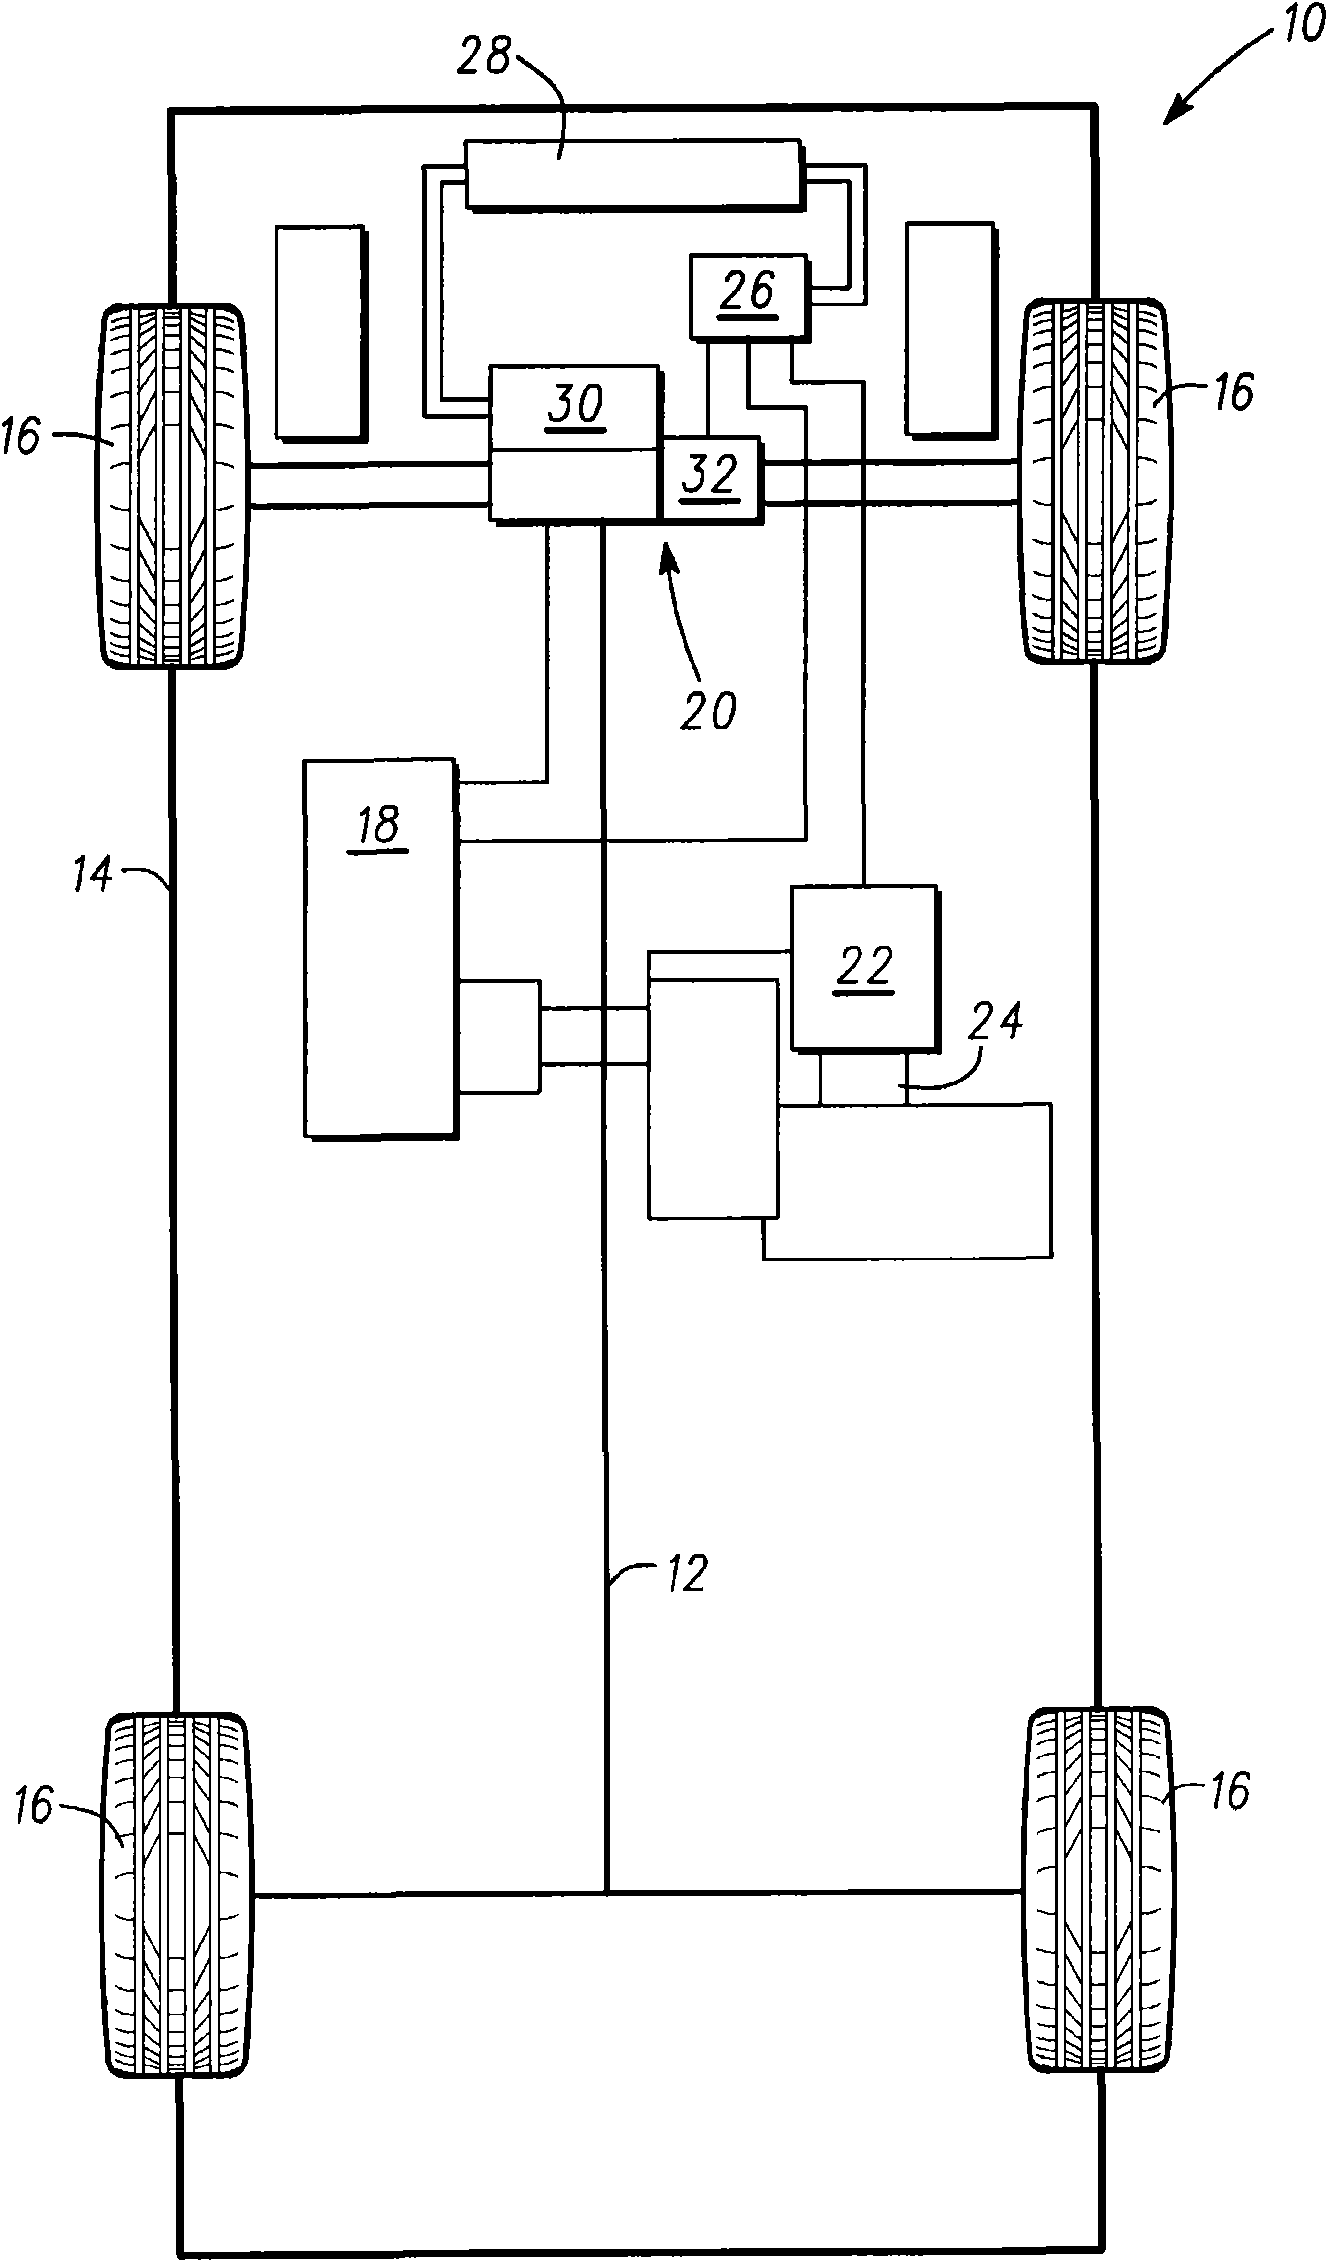 Fractional slot winding configuration for electric motor